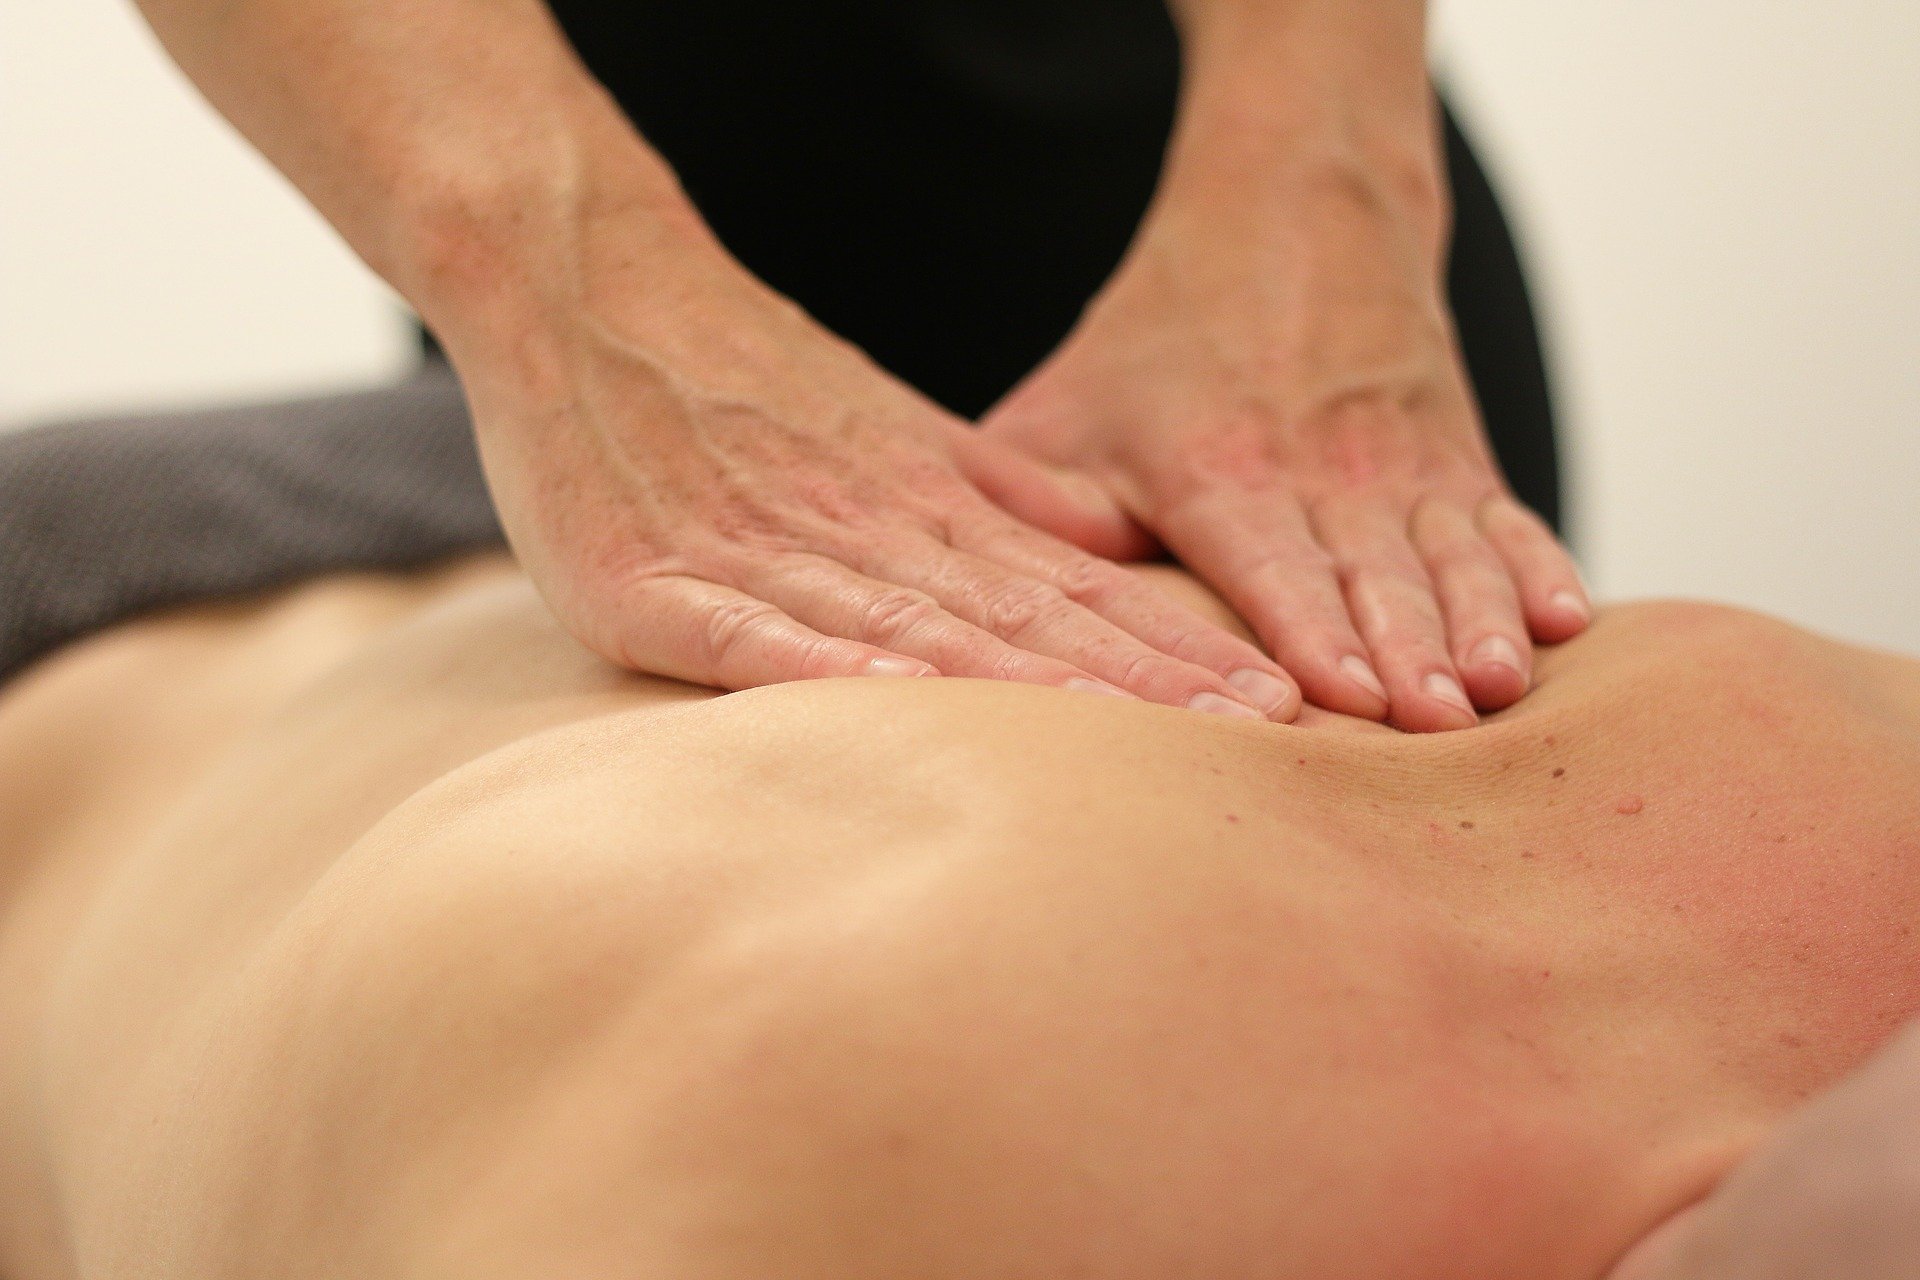 Benefits of massage therapy can be viewed in three ways: relief from injury, muscle conditioning, and reduced stress.